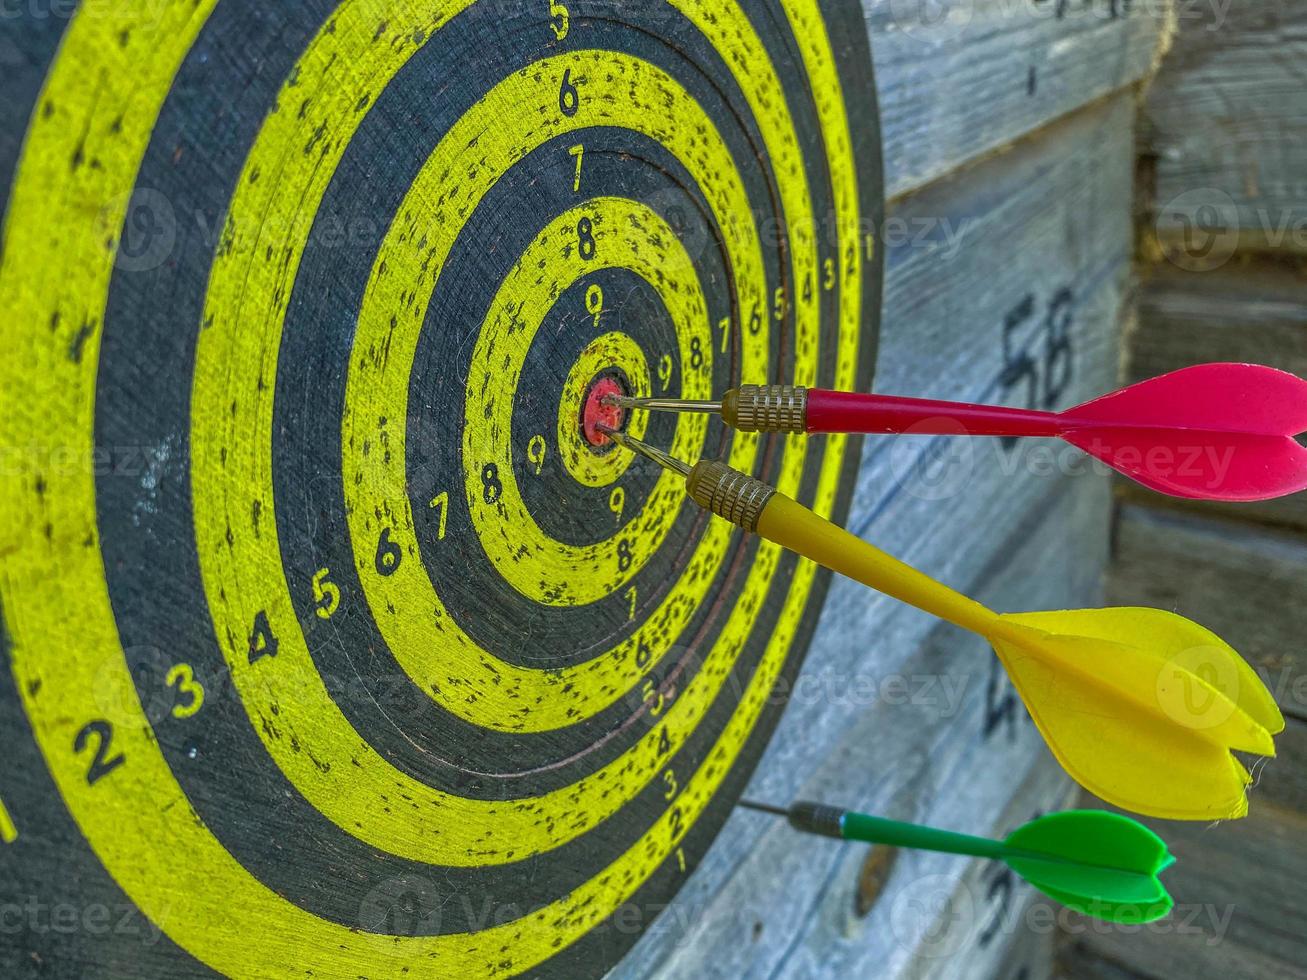 active outdoor games. darts with darts. shooting a dart with a feather straight at the target. yellow field with marks points. game of accuracy photo